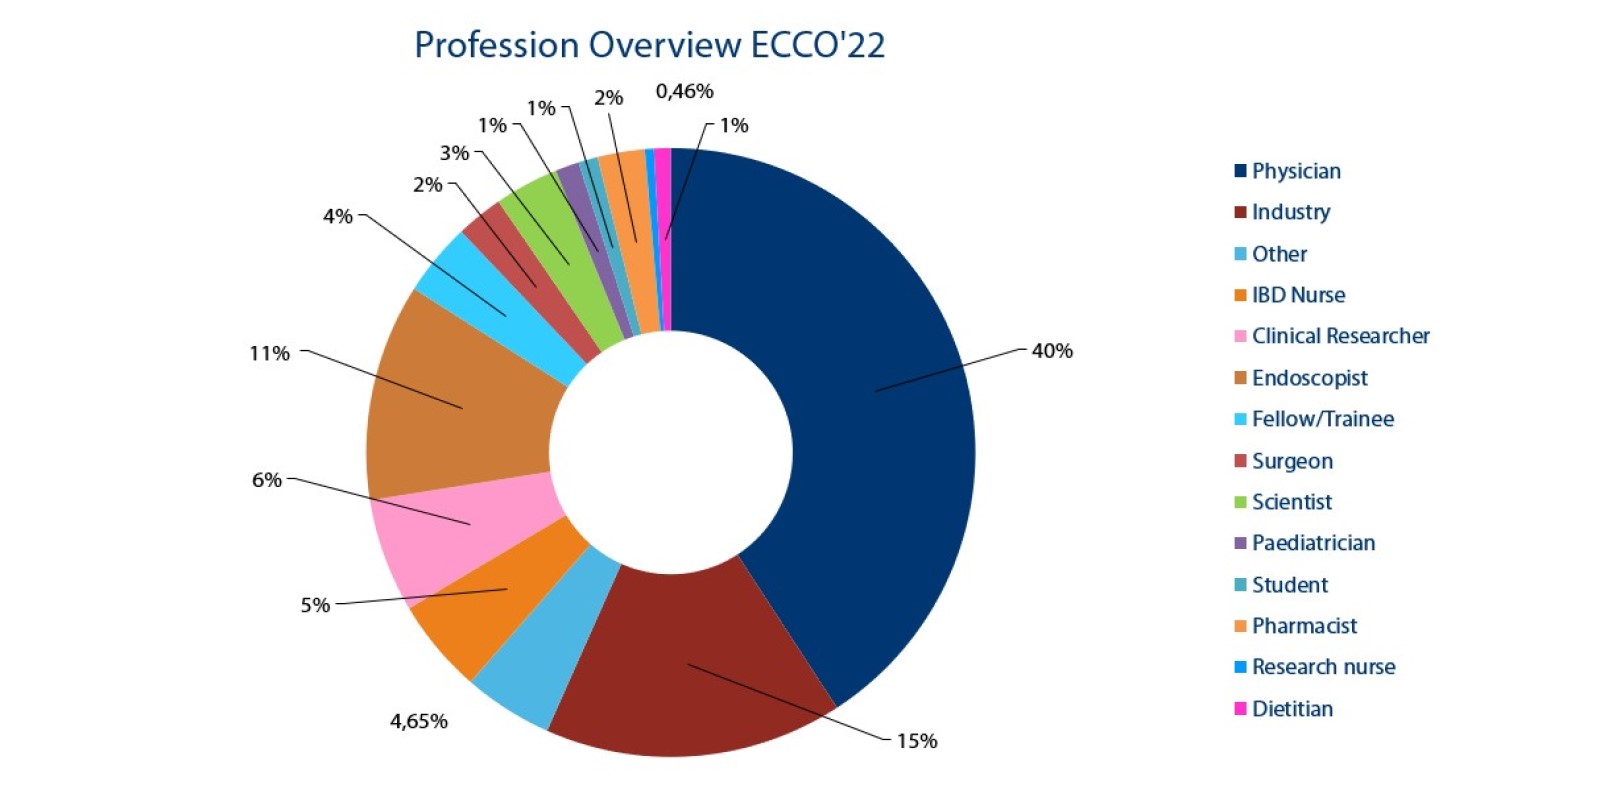 2022 Profession Overview